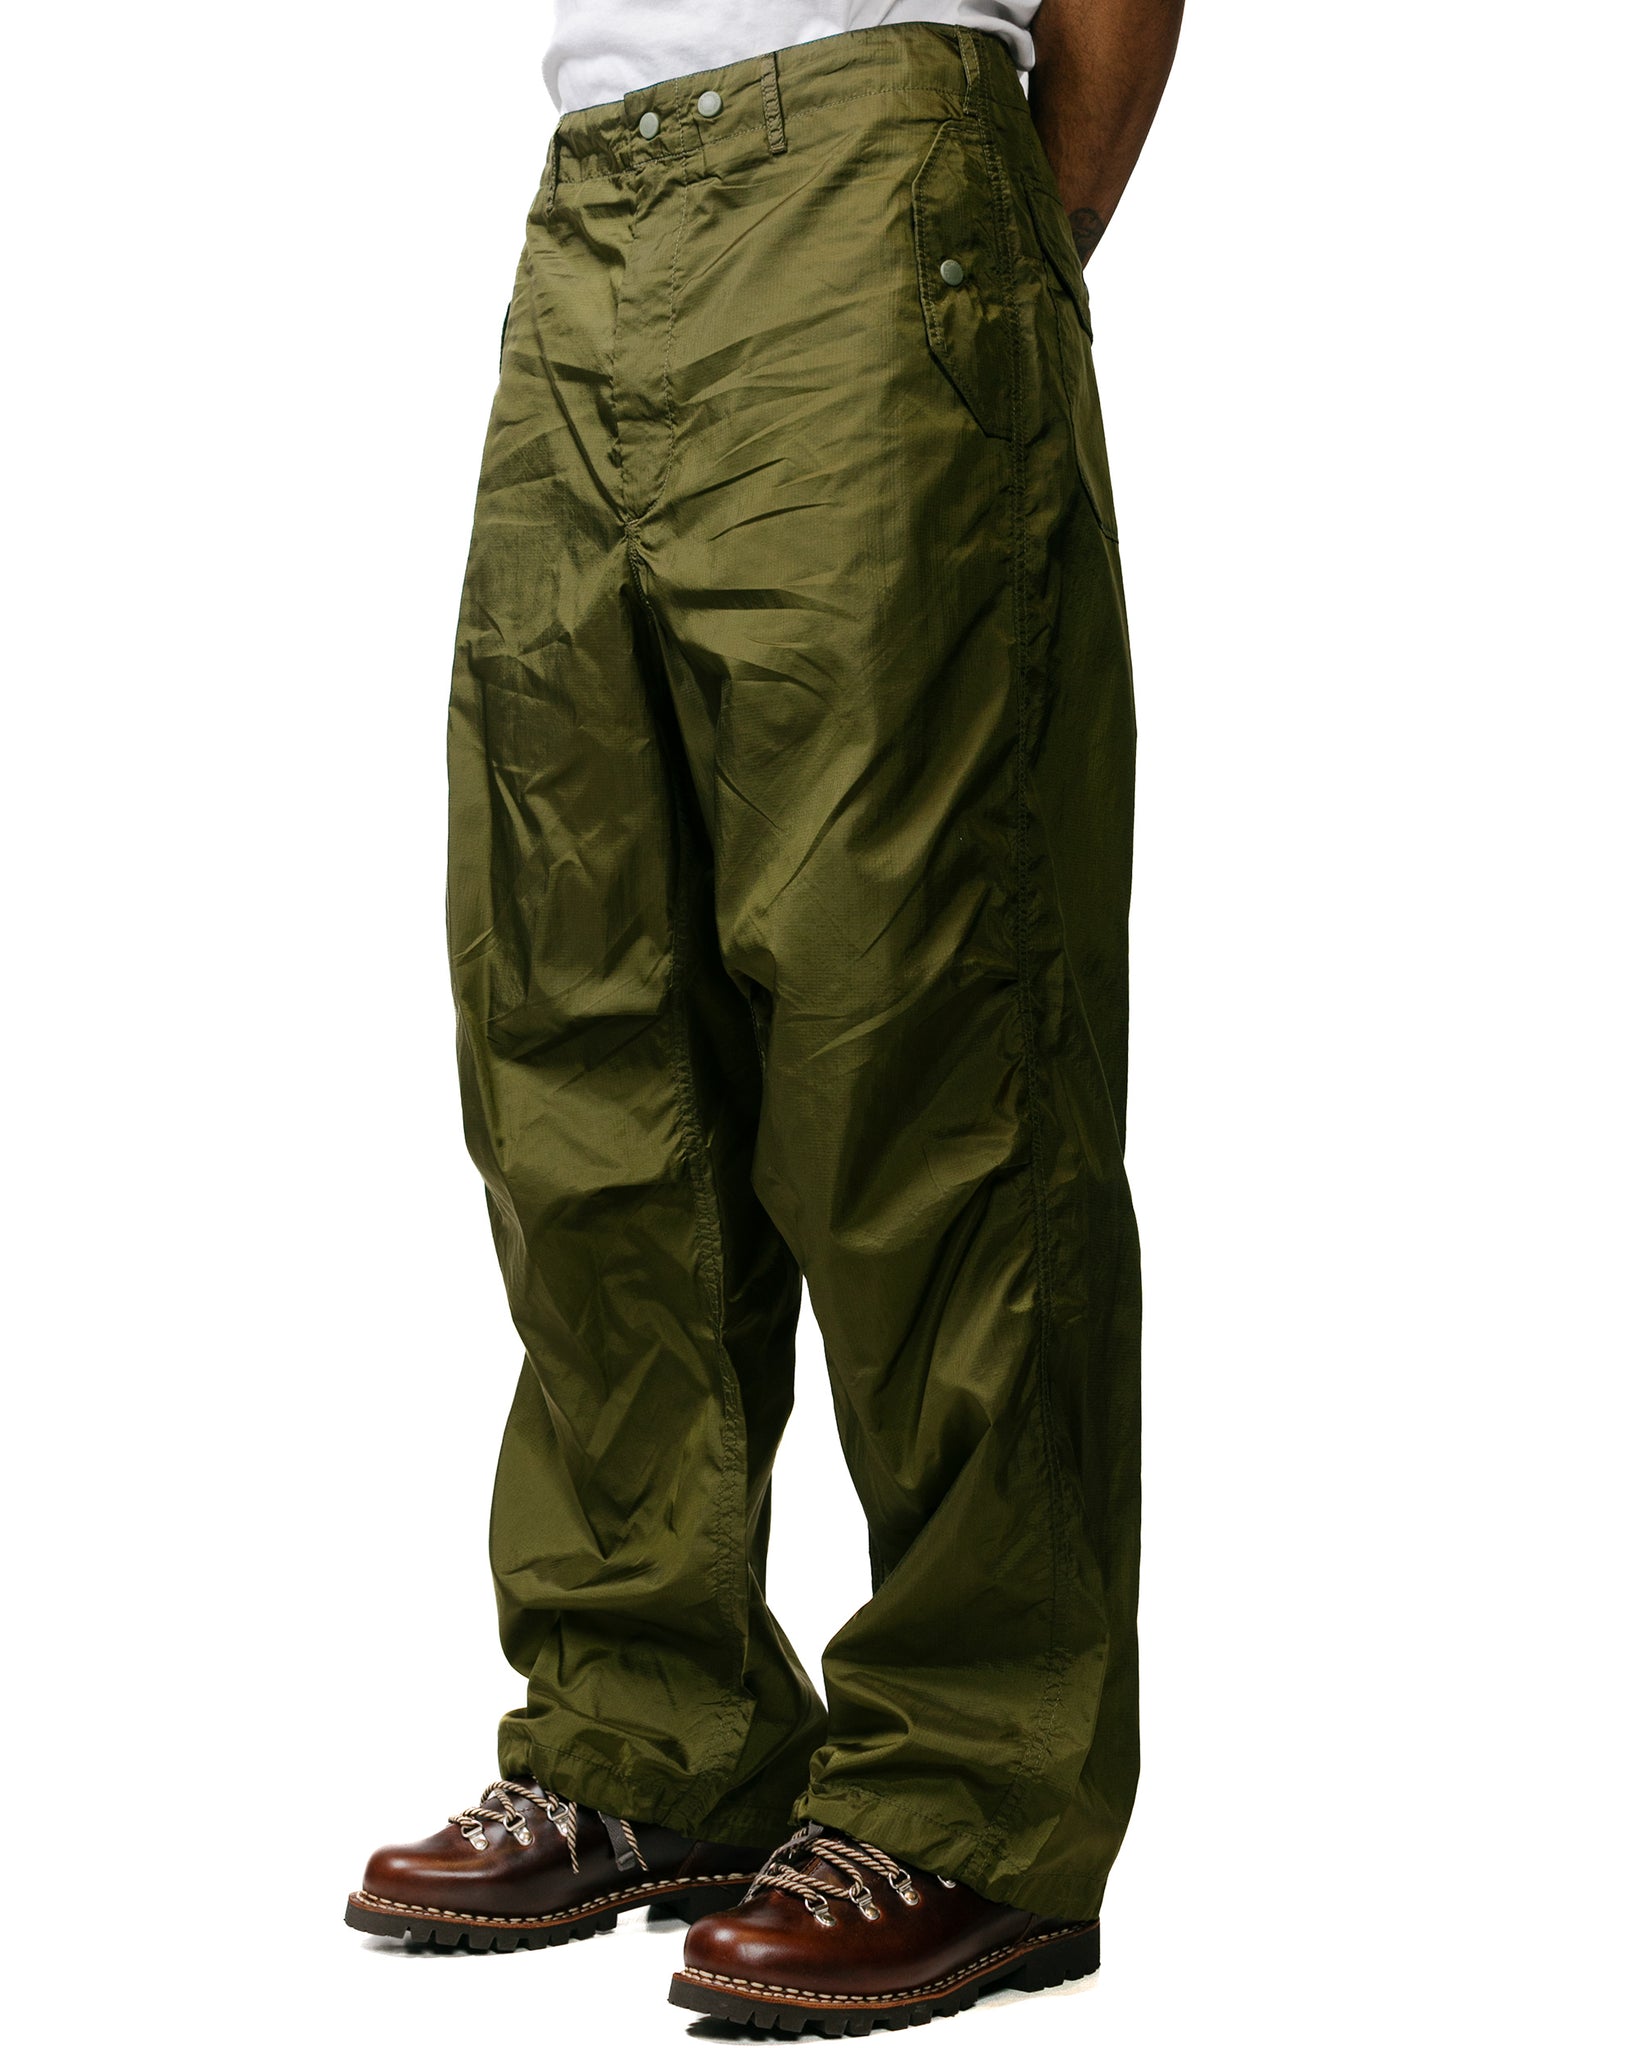 Engineered Garments Over Pant Olive Nylon Ripstop model front